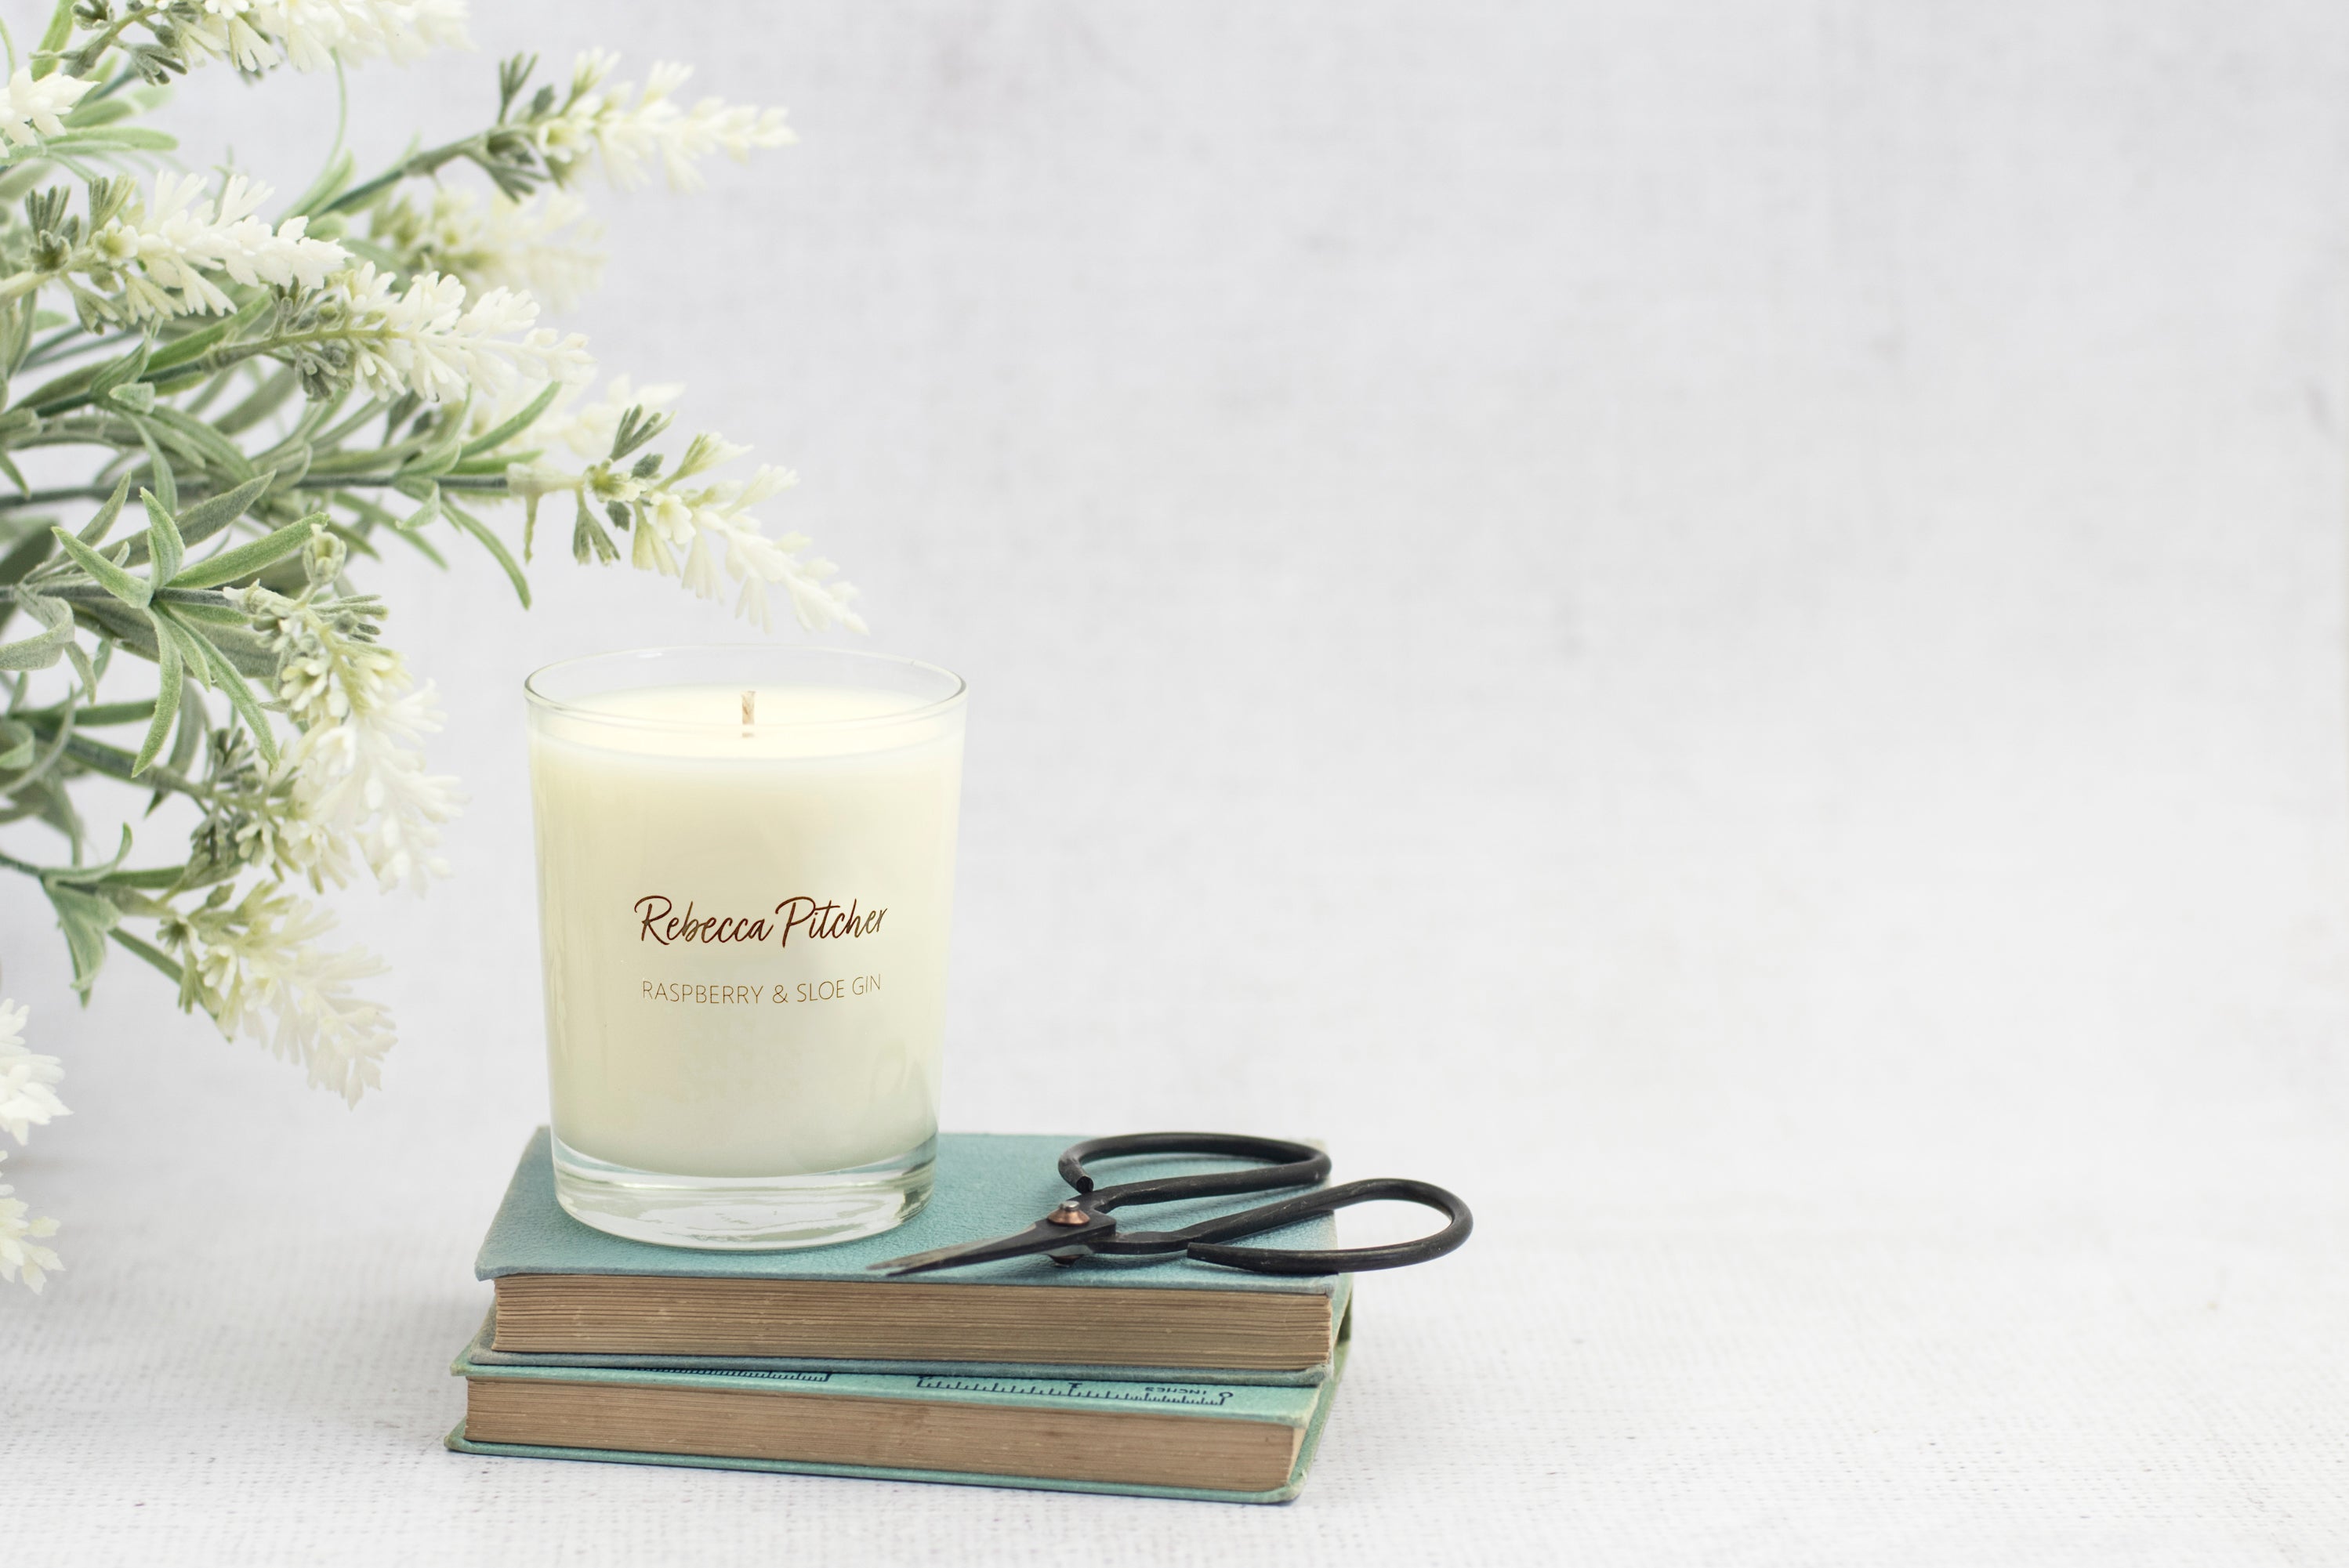 Soy Wax Scented Candles